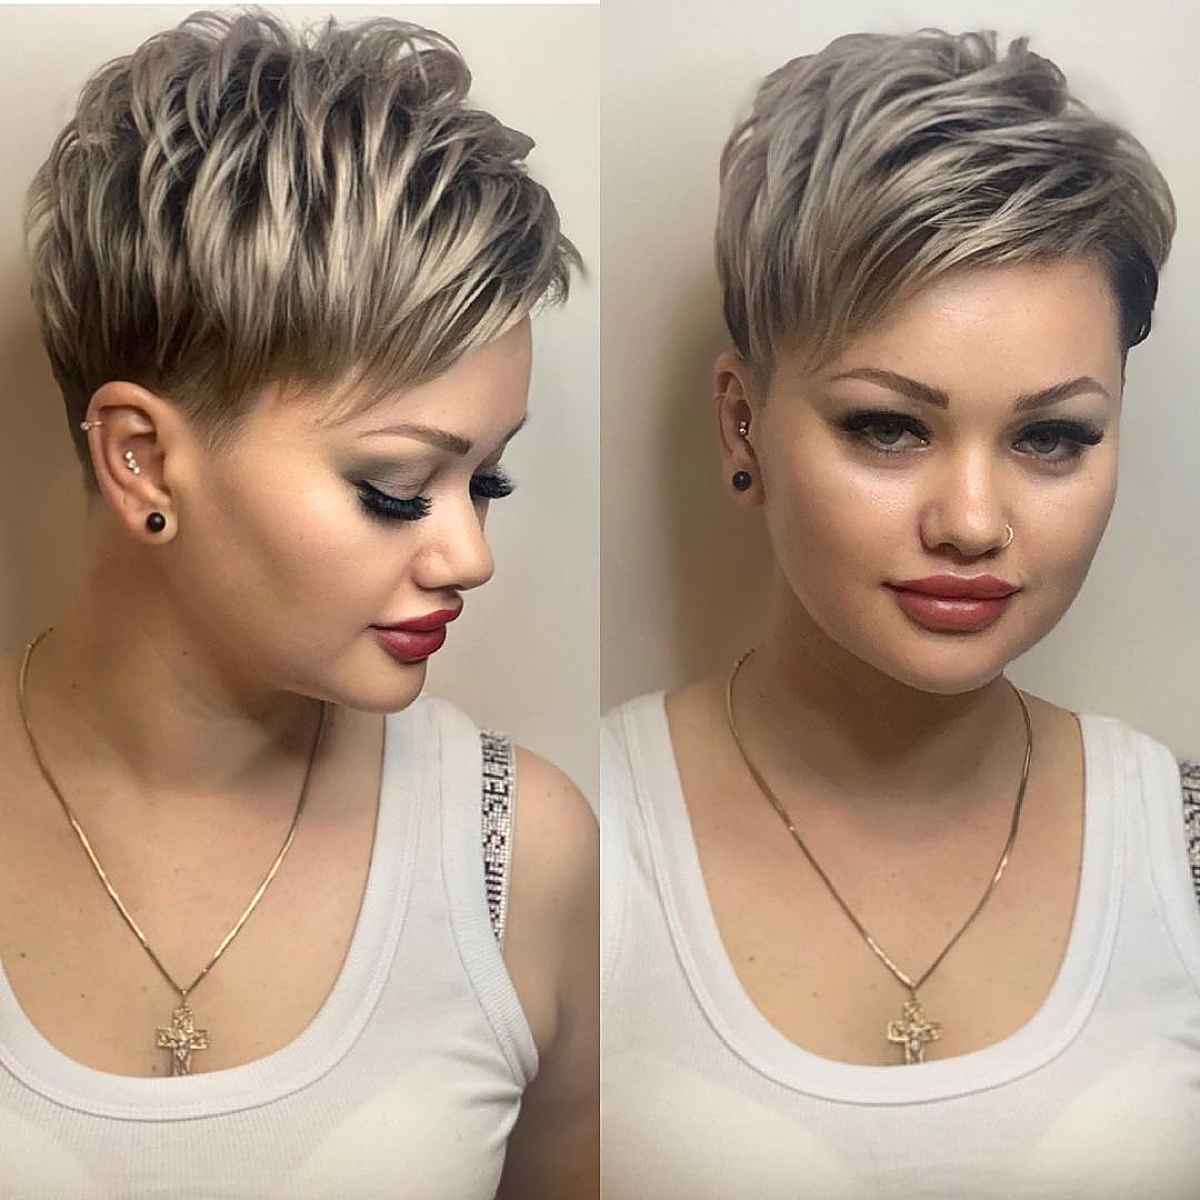 Edgy Pixie for Women with Round Faces